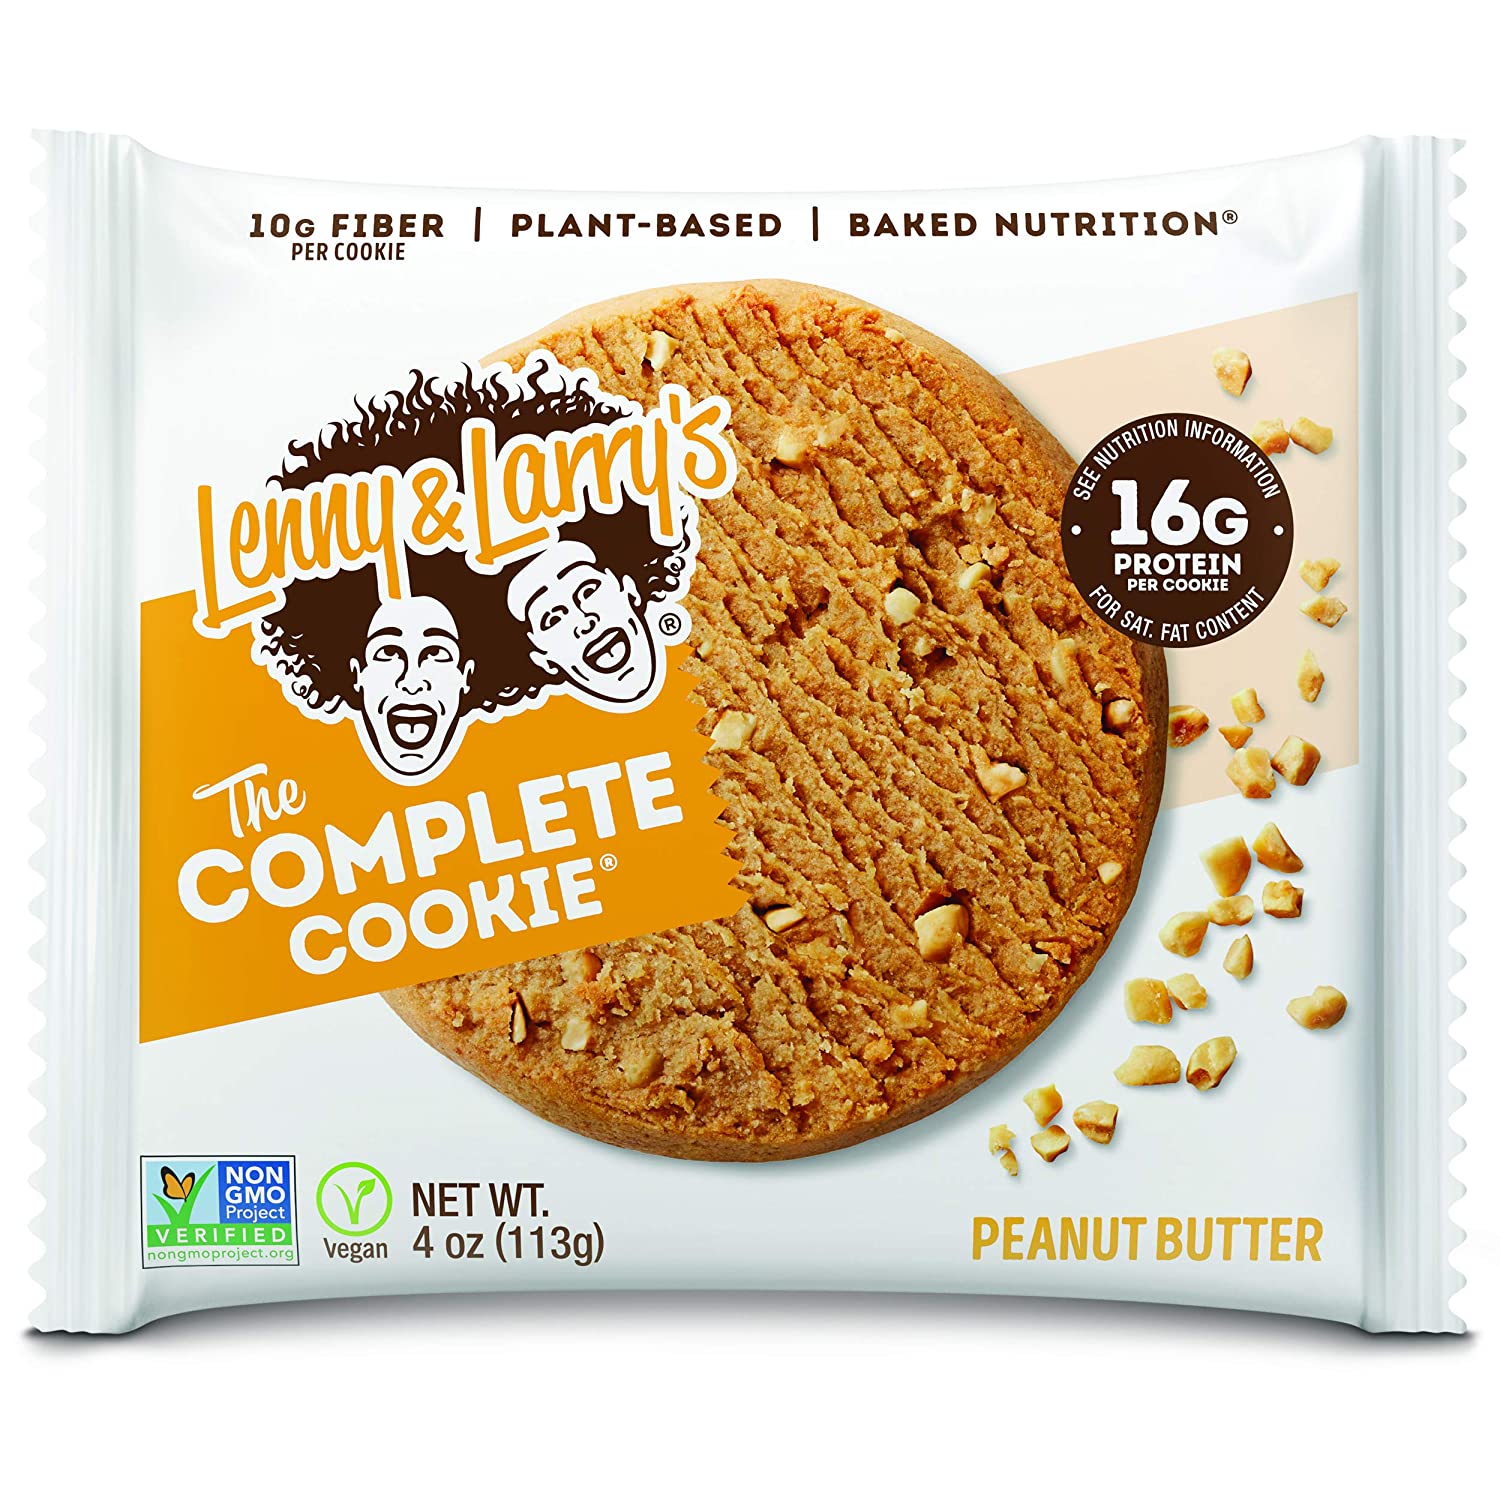 12 count Lenny & Larry's The Complete Cookie, Peanut Butter or Choc-o-mint, 4-Ounce Cookies, $11.87 w/ S&S, Amazon